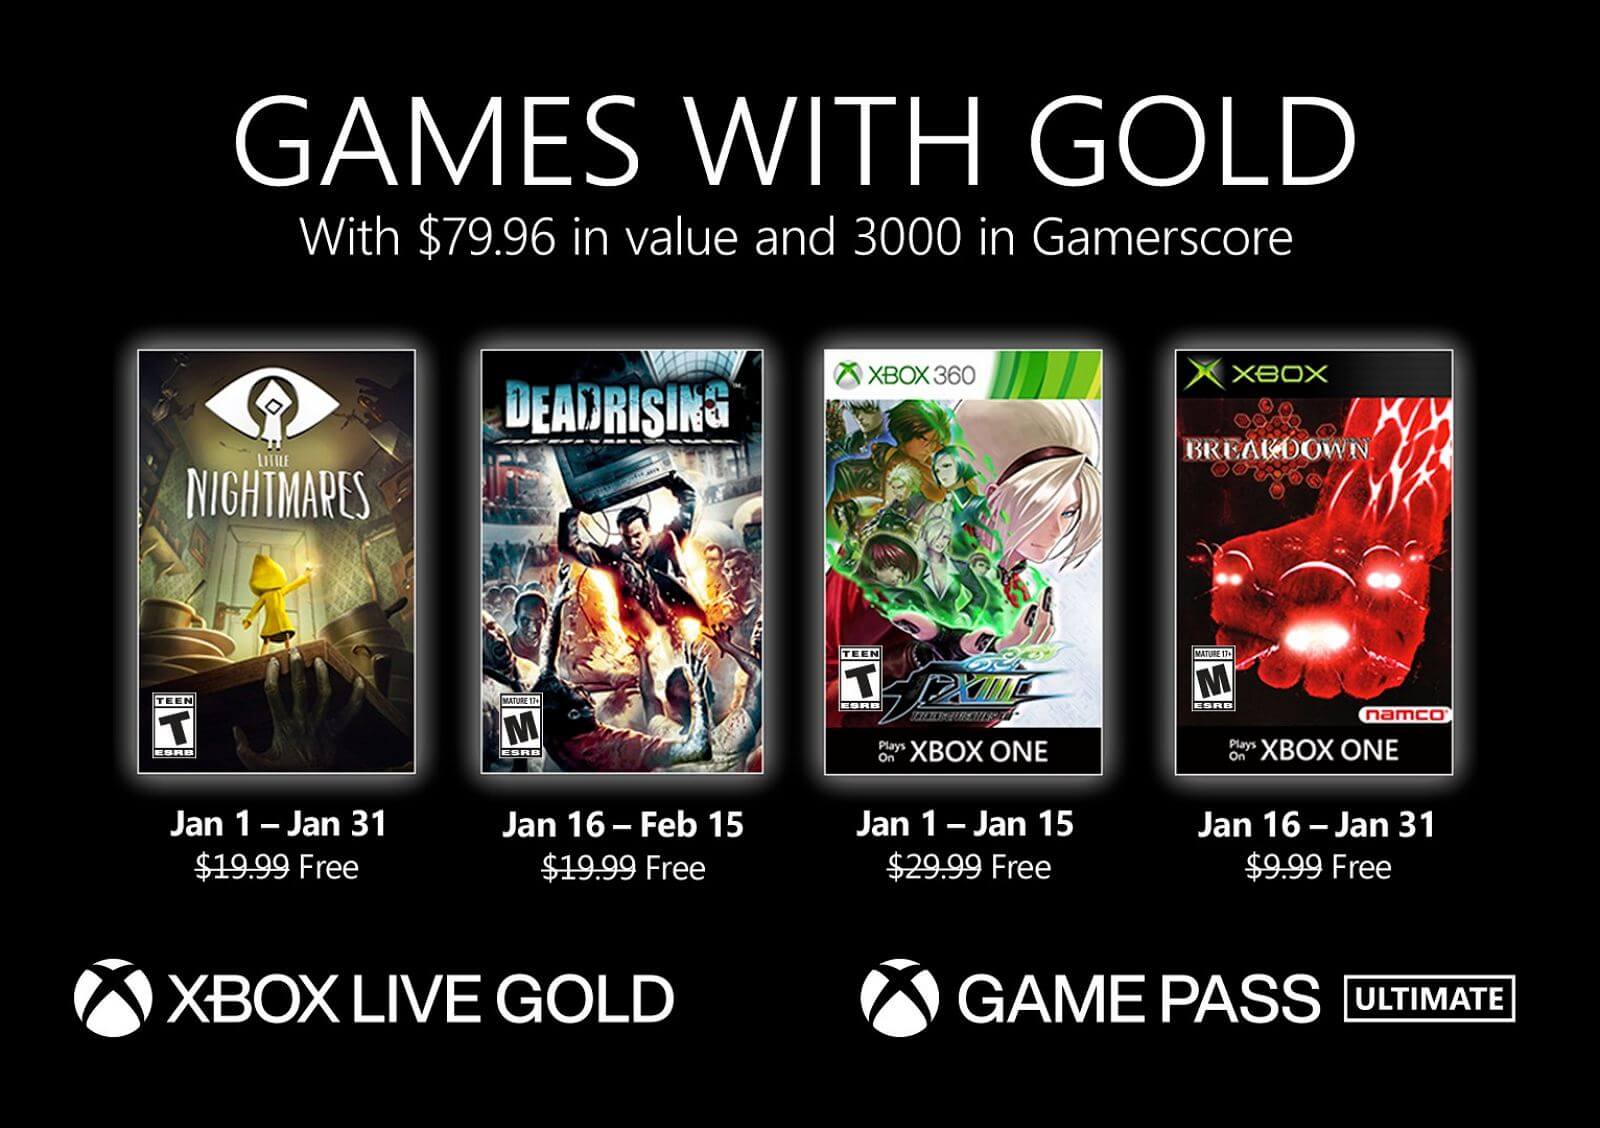 Xbox Games With Gold April 2021 Games – Free Games!